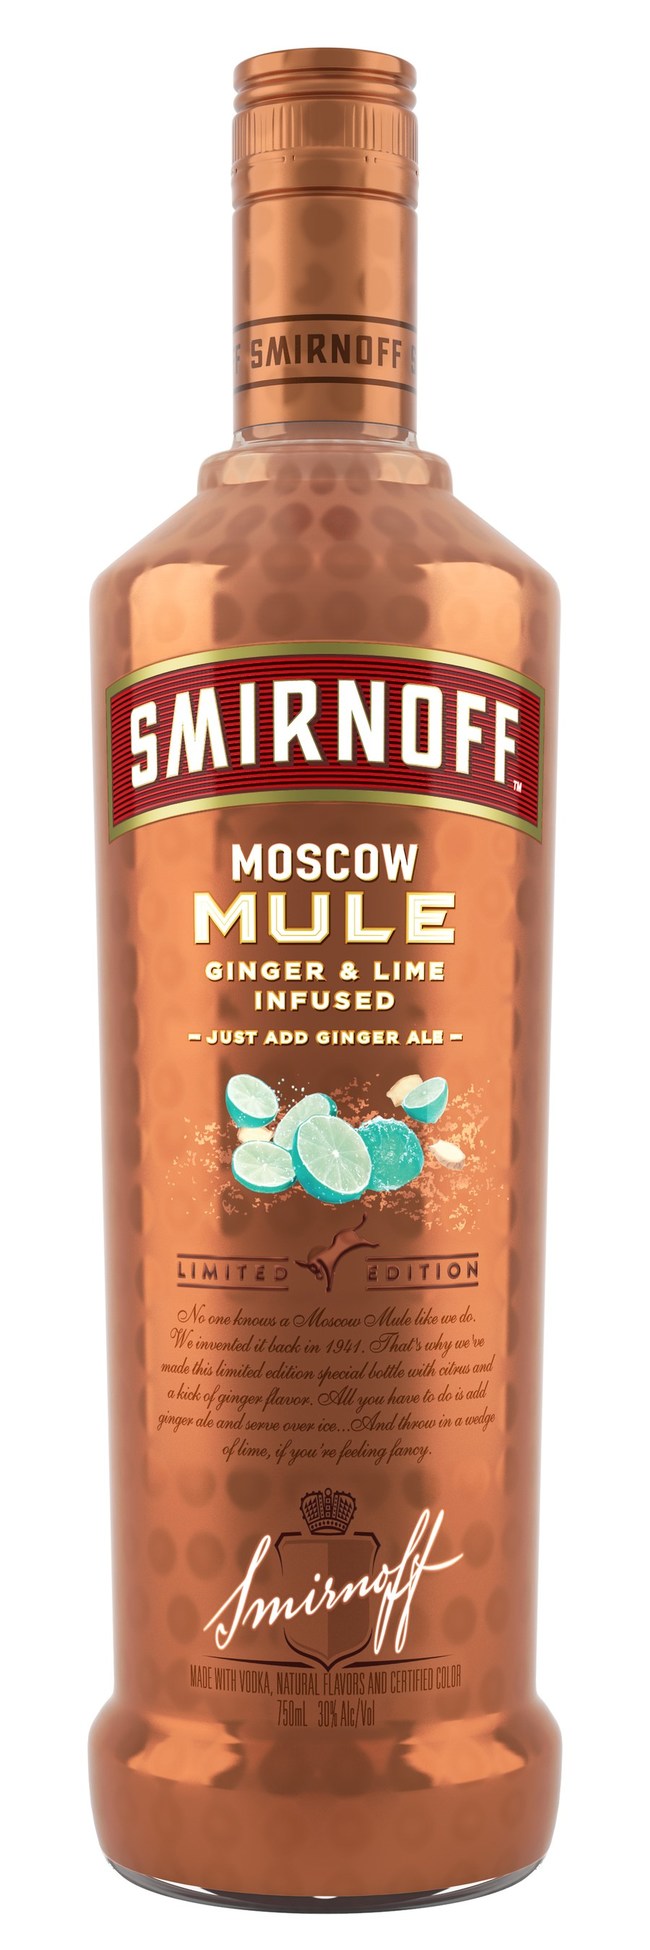 Smirnoff Vodka Reinvents The Moscow Mule With The Launch Of The New Smirnoff Moscow Mule Flavor